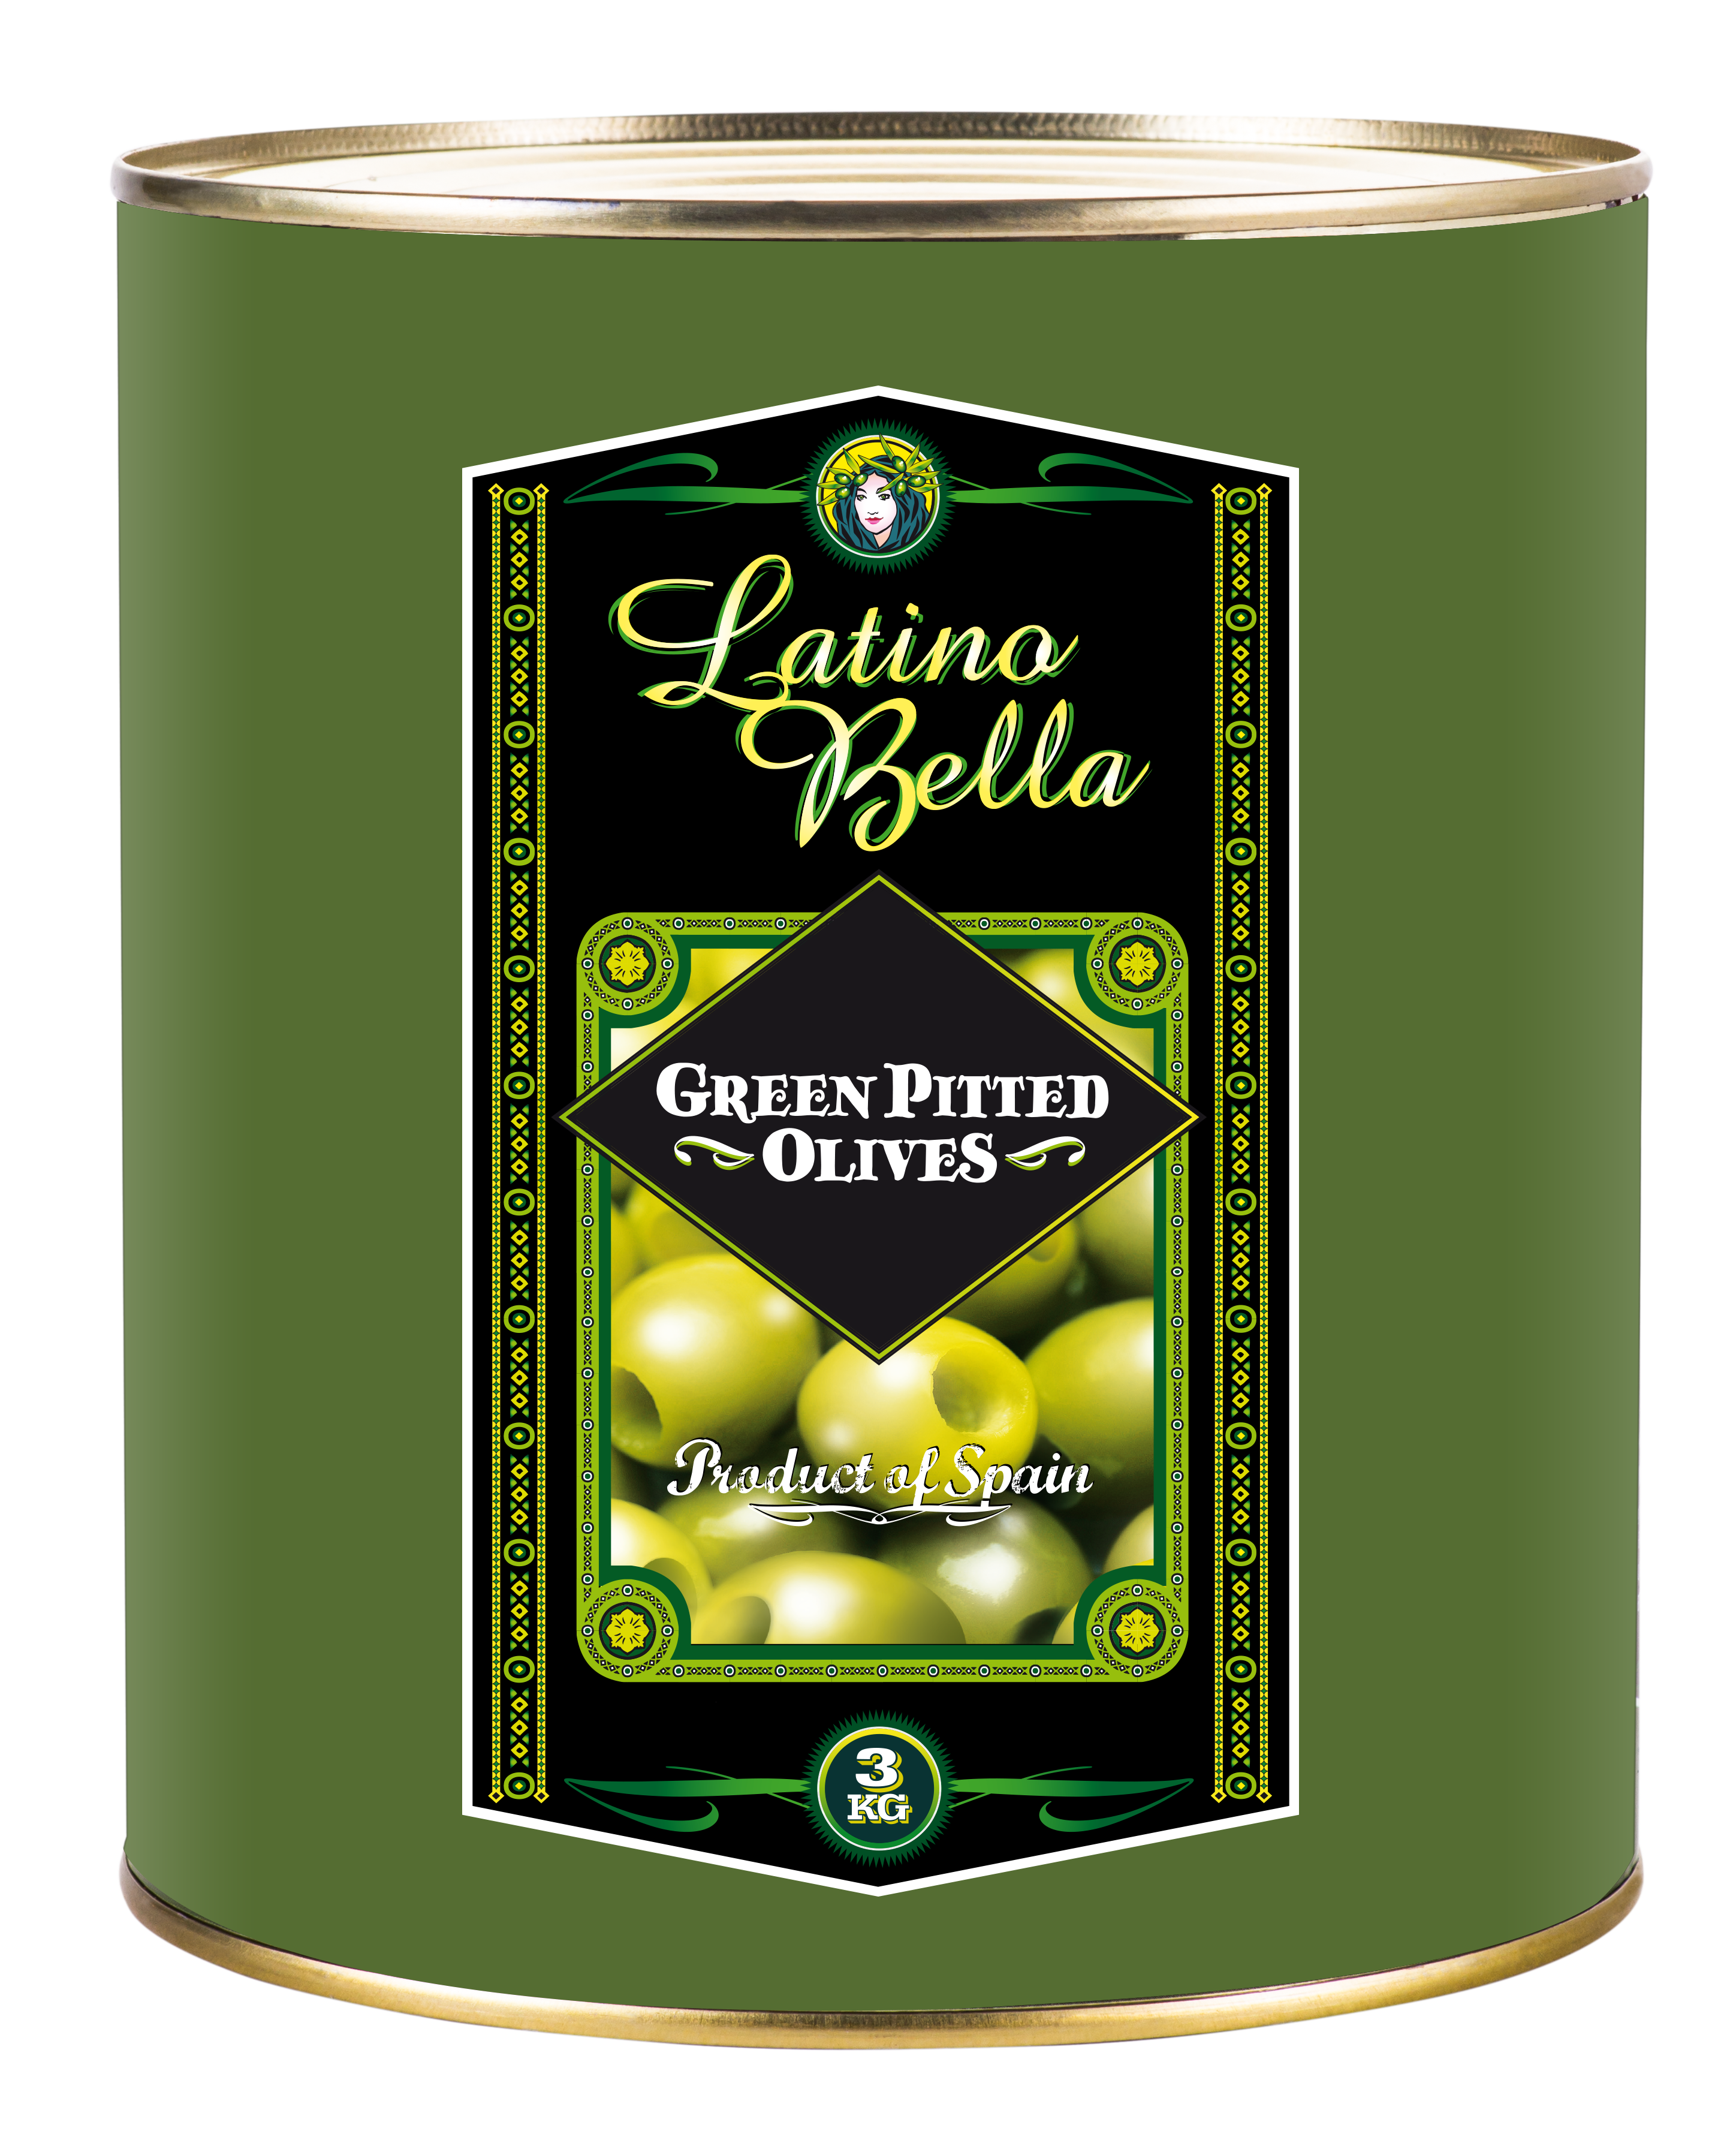 Latino Bella Pitted Green Olives Tins (3Kg)